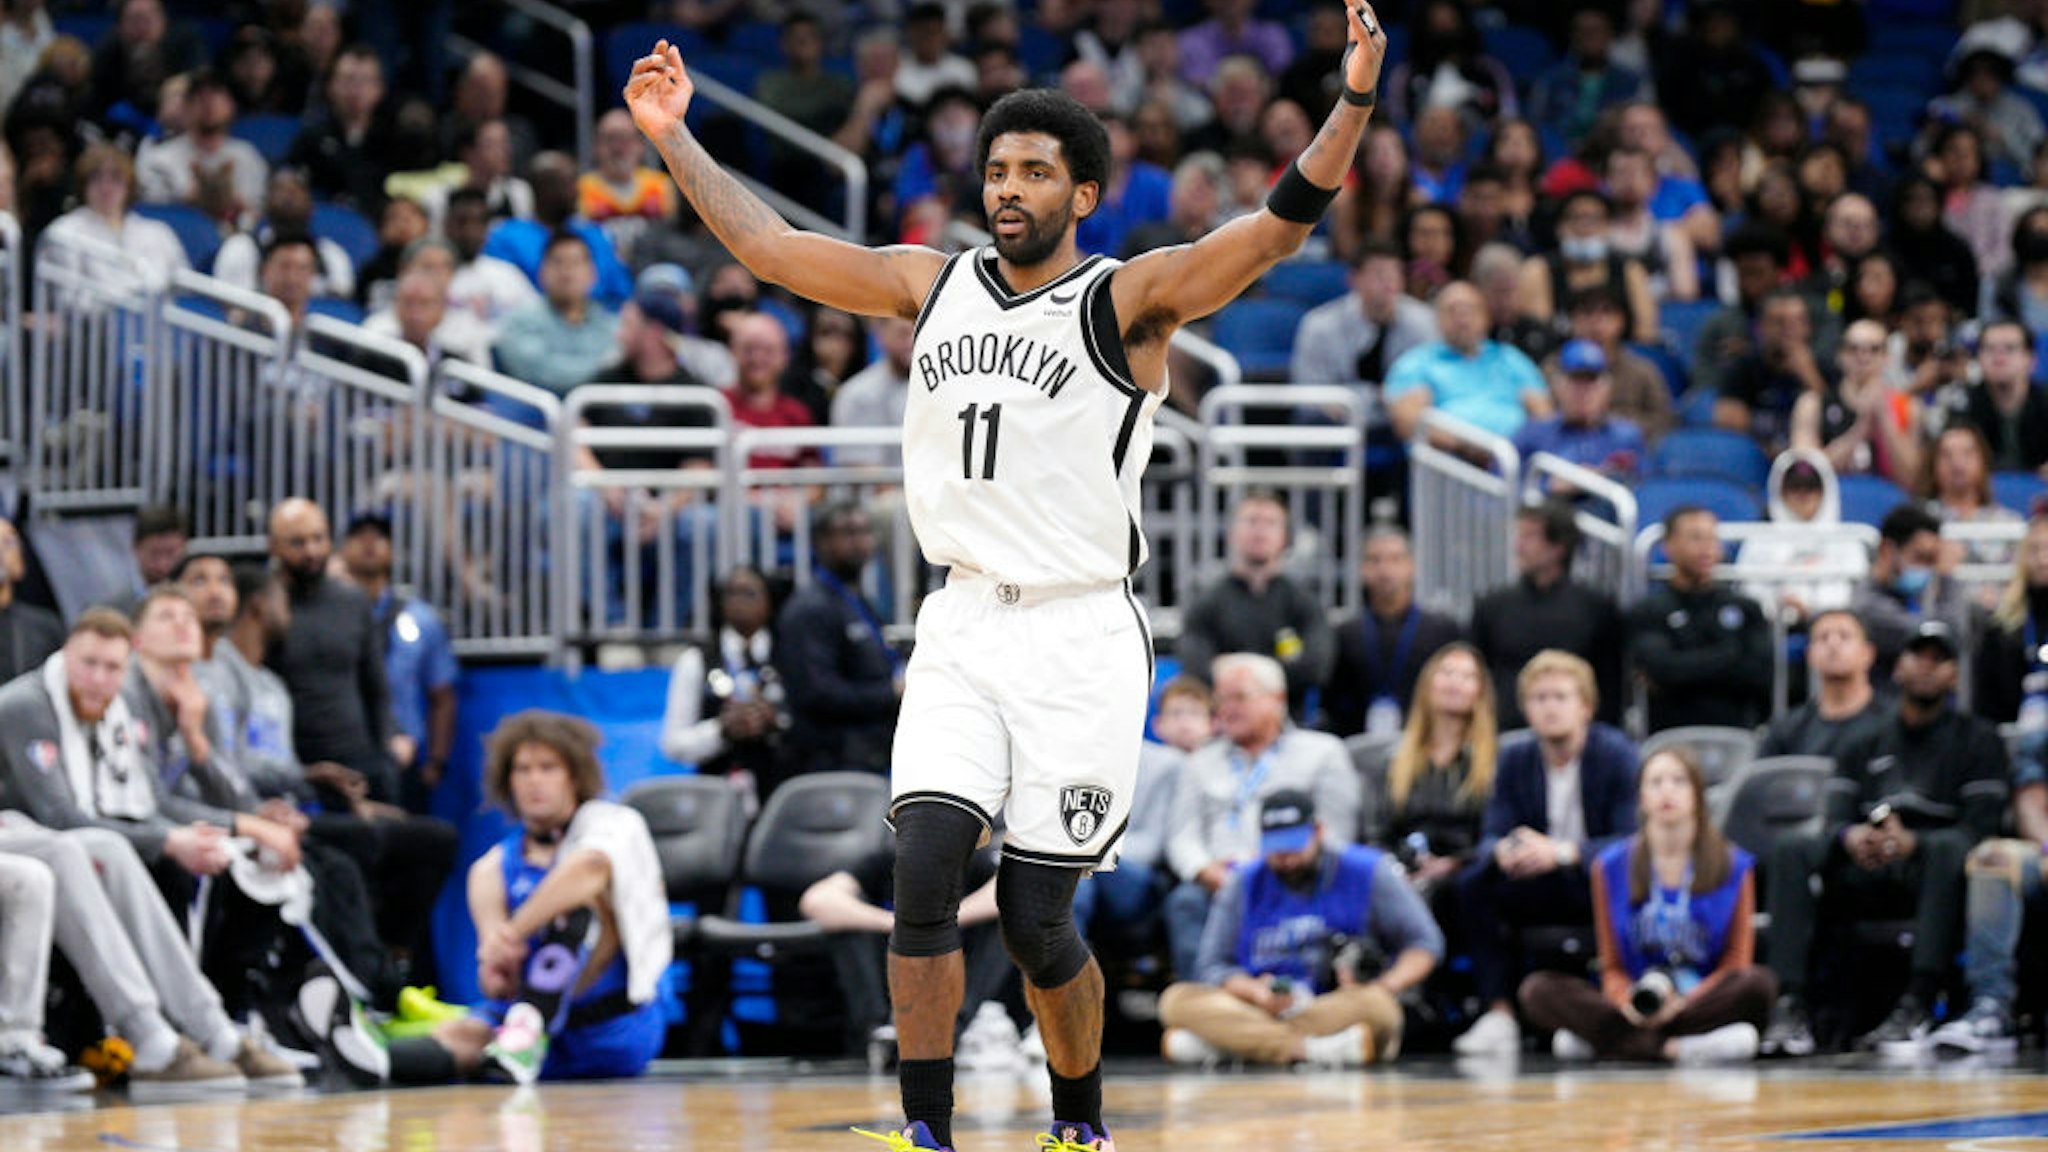 ORLANDO, FLORIDA - MARCH 15: Kyrie Irving #11 of the Brooklyn Nets celebrates after scoring against the Orlando Magic in the first half at Amway Center on March 15, 2022 in Orlando, Florida. NOTE TO USER: User expressly acknowledges and agrees that, by downloading and or using this photograph, User is consenting to the terms and conditions of the Getty Images License Agreement. (Photo by Mark Brown/Getty Images)